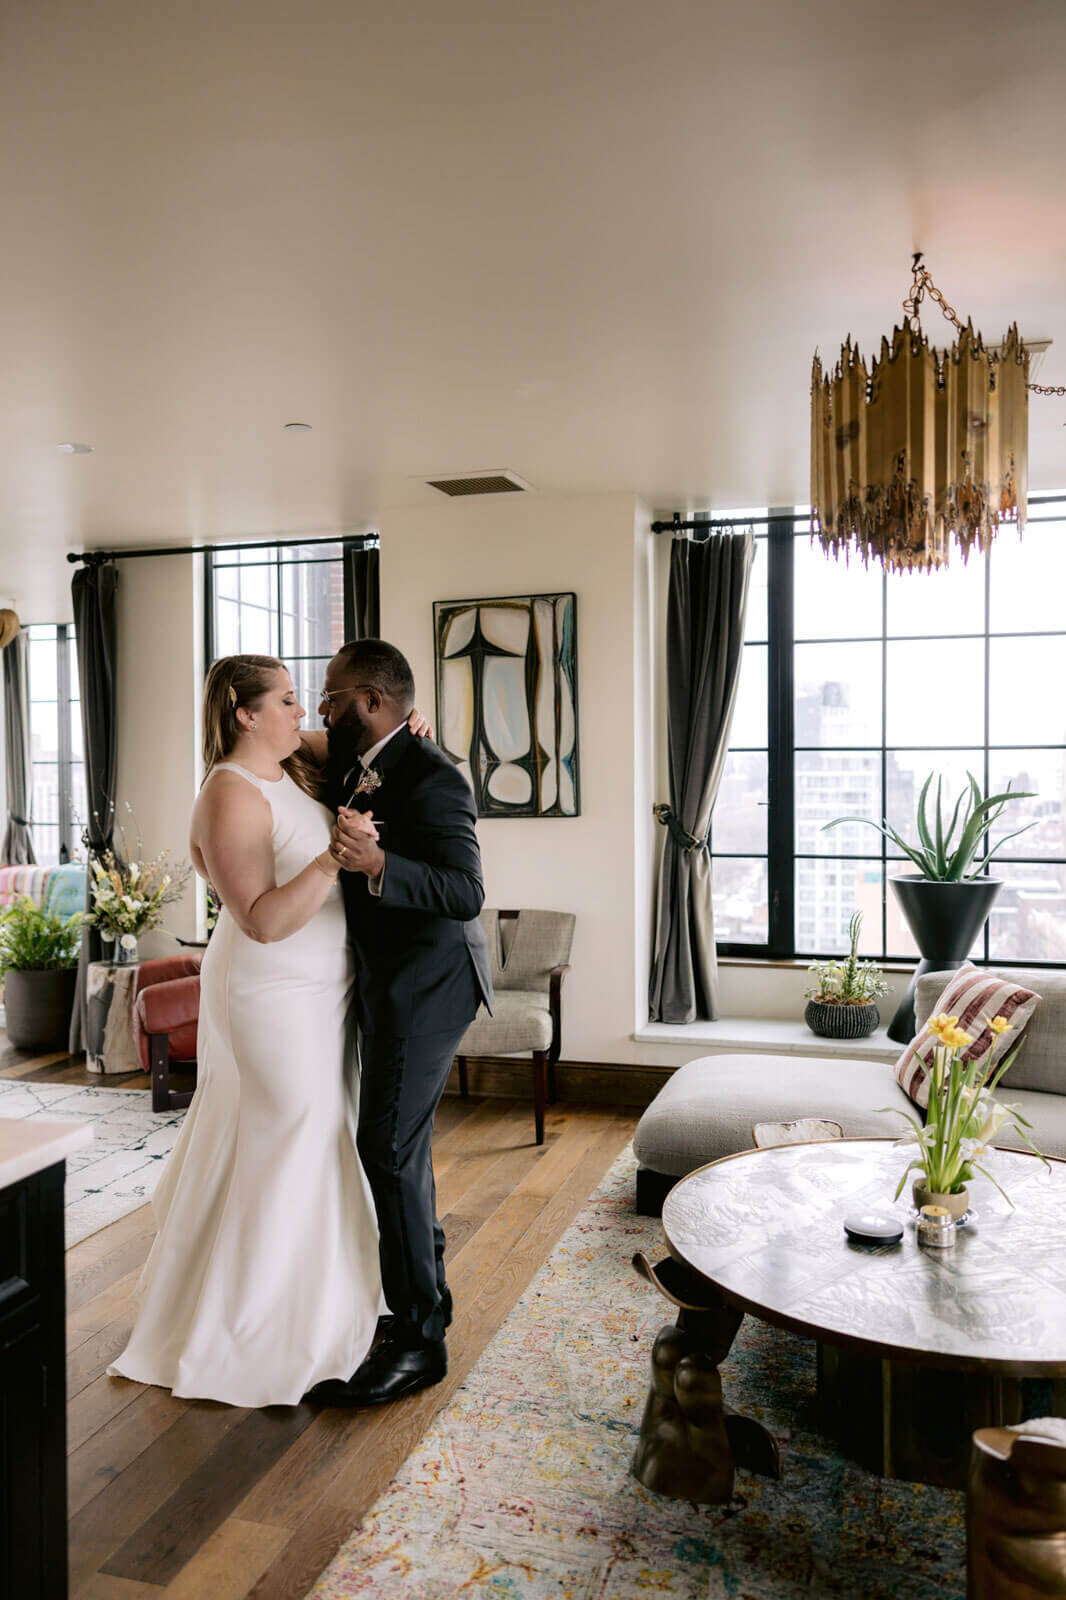 The bride and the groom are dancing inside a Ludlow Hotel room in New York City.